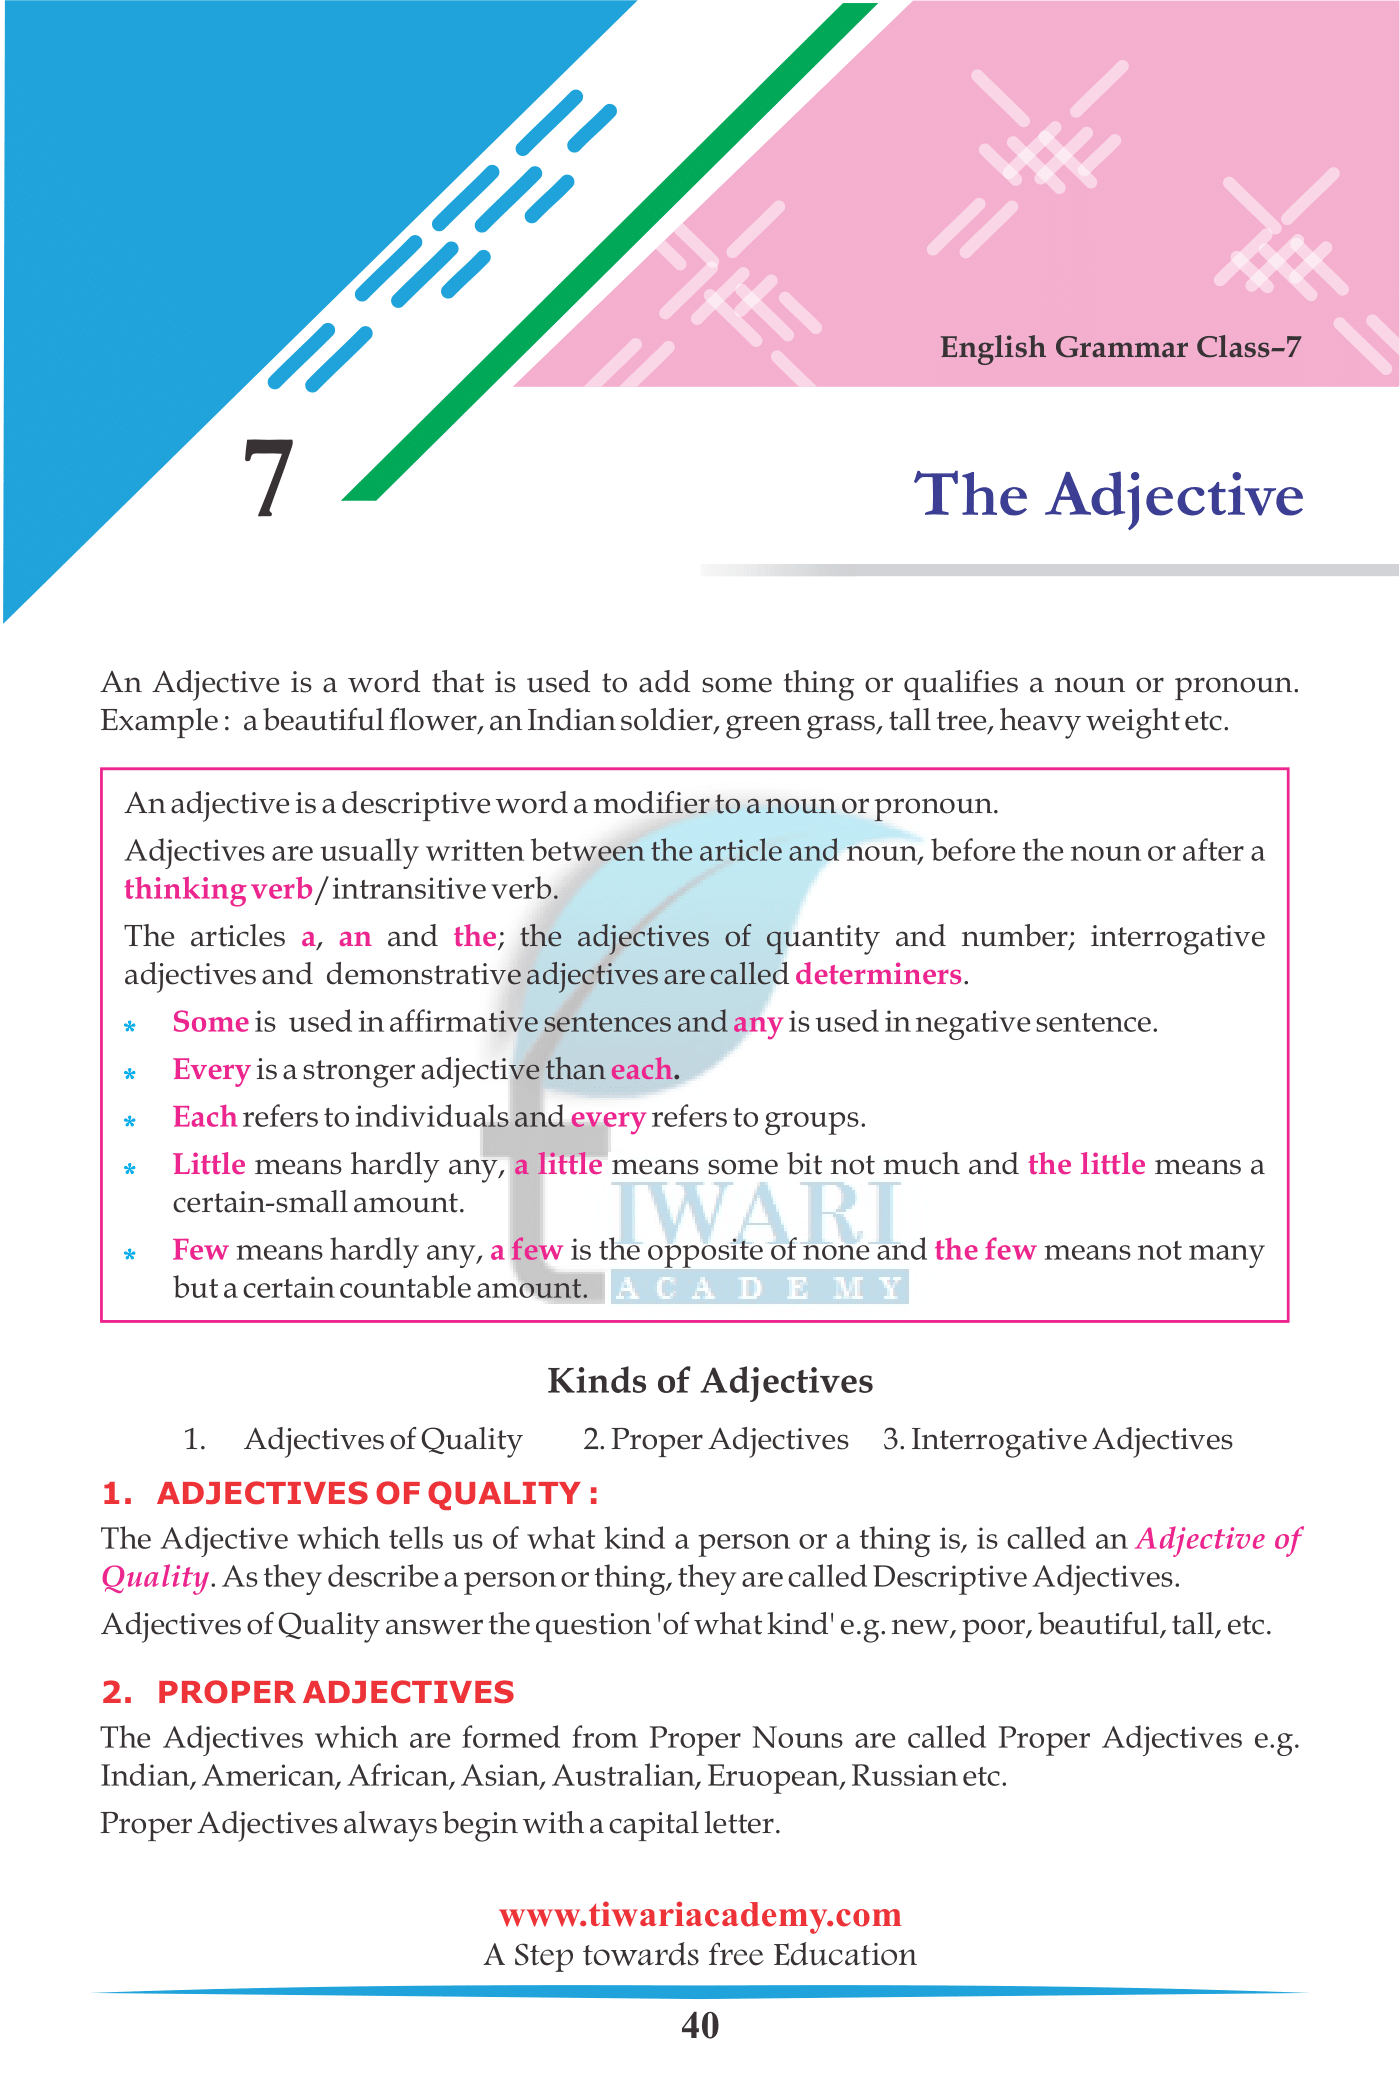 Class 7 English Grammar Chapter 7 The Adjective for 2022-2023